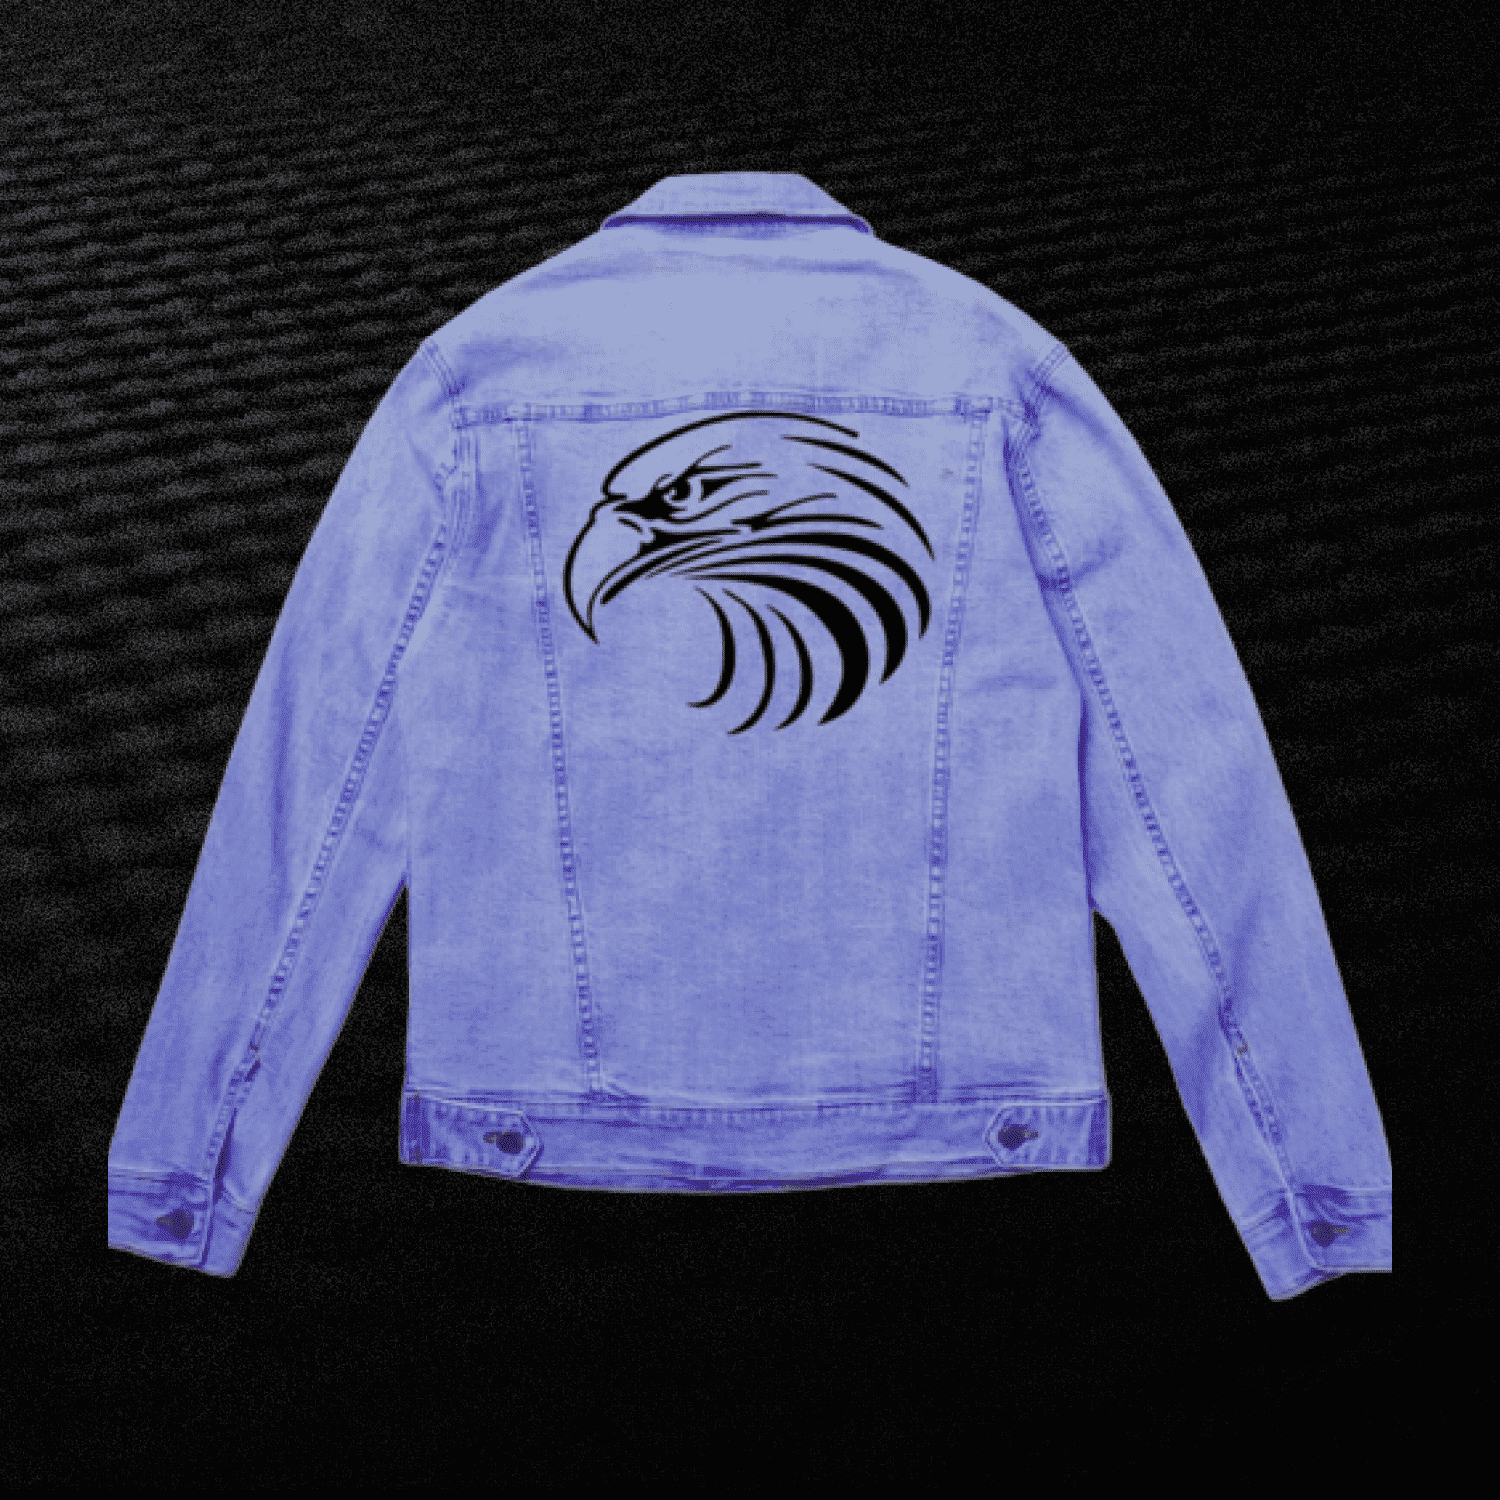 Denim jacket with an eagle on the back.